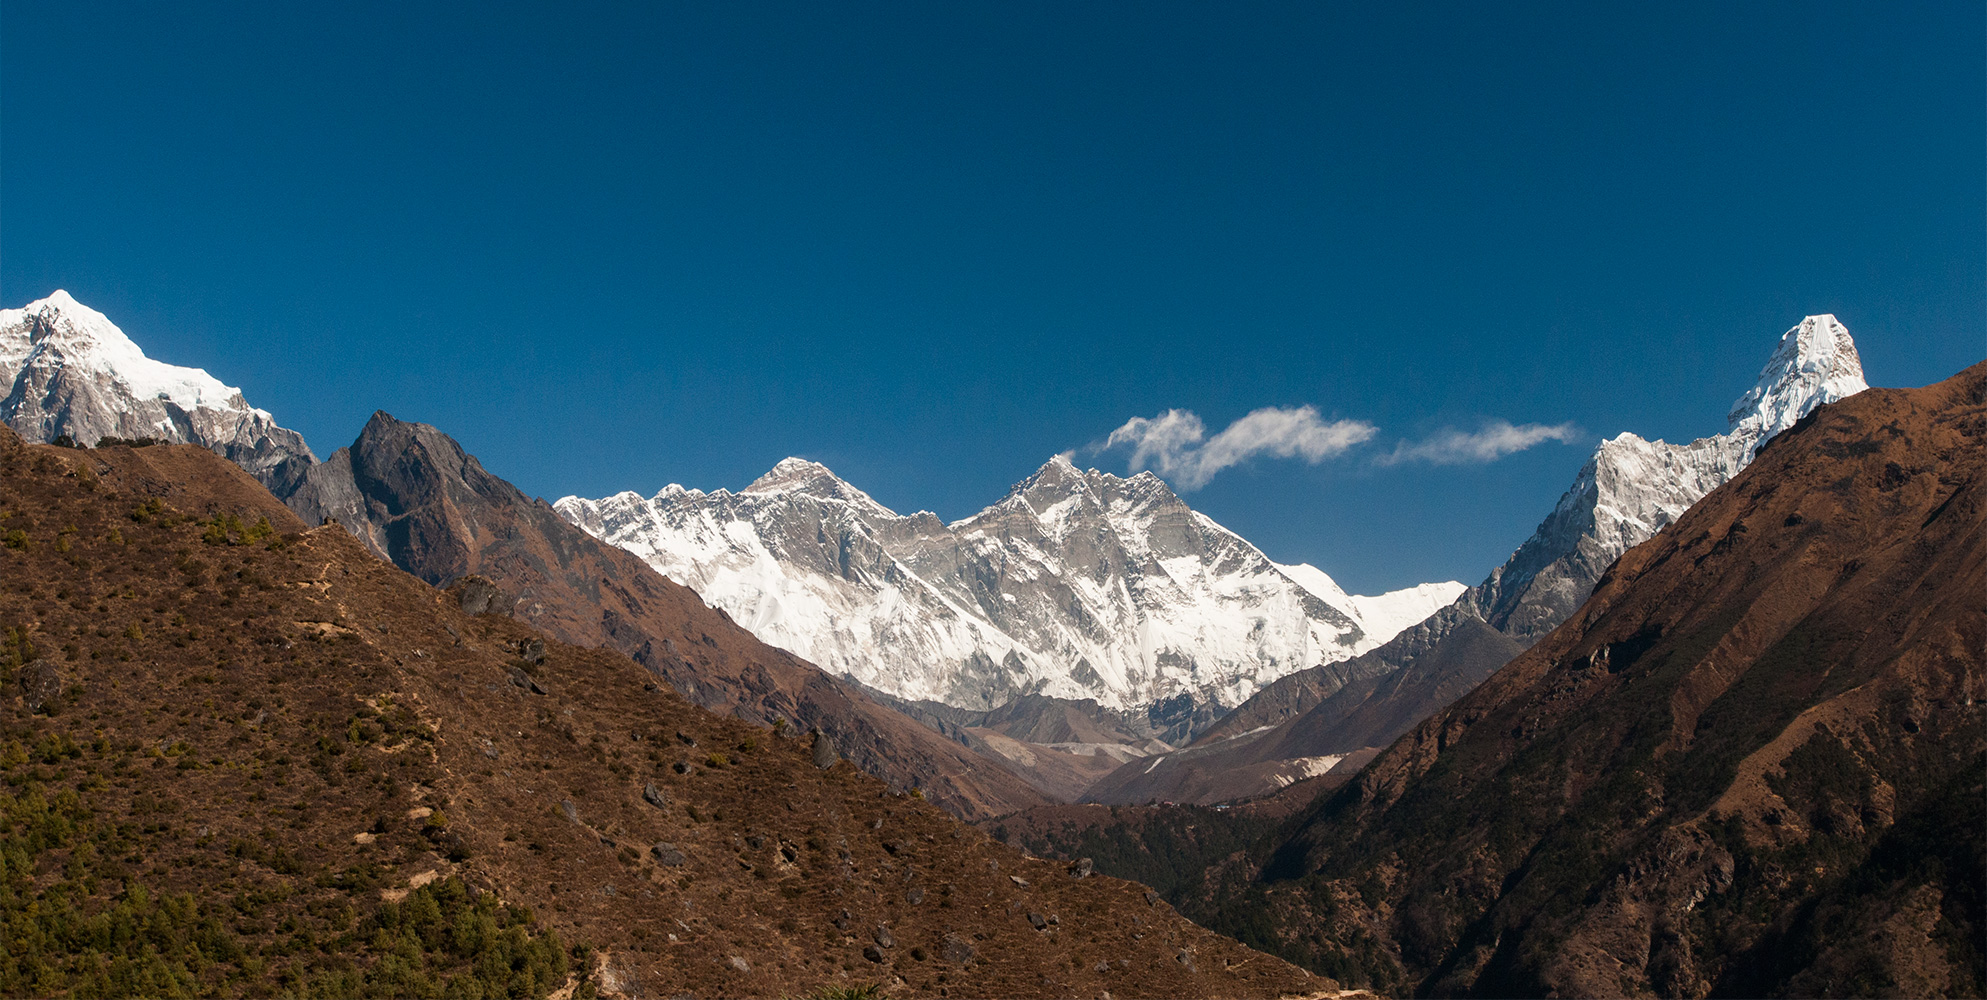 A view up valley from just above Namche Bazaar. Straight ahead, Everest peeps over the towering south wall of Lhotse, on the right is Ama Dablam, and on a low ridge in the middle distance is Tengboche Gompa.Nikon D300, 17-35mm. November 2008